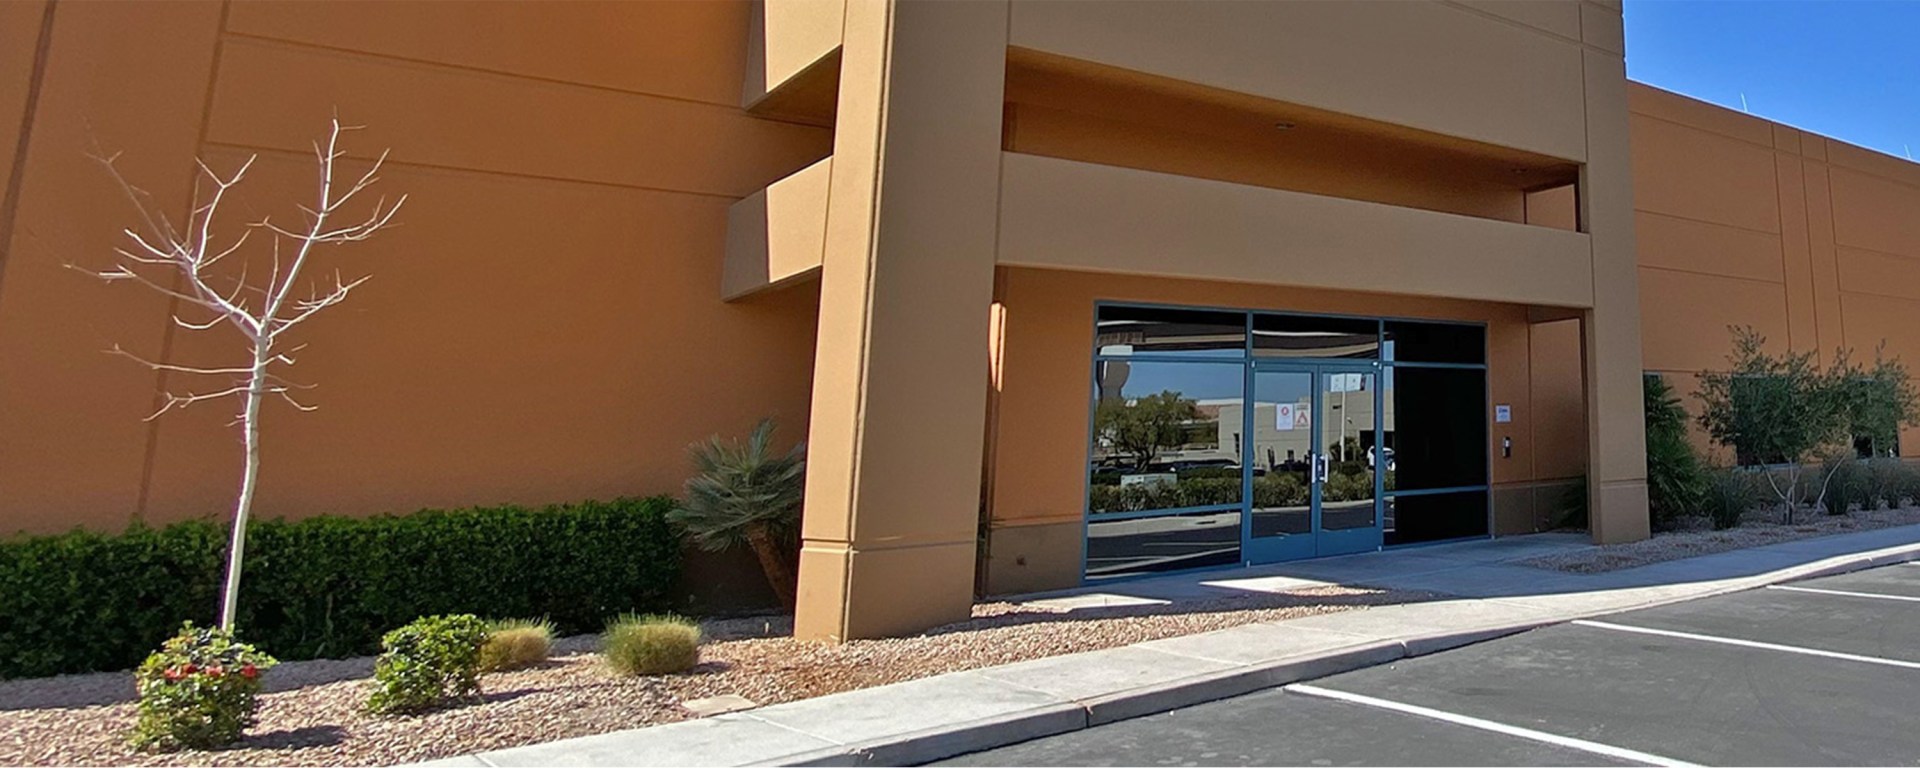 DataBank Completes Lease Buy-Back for LAS1 Data Center in Las Vegas